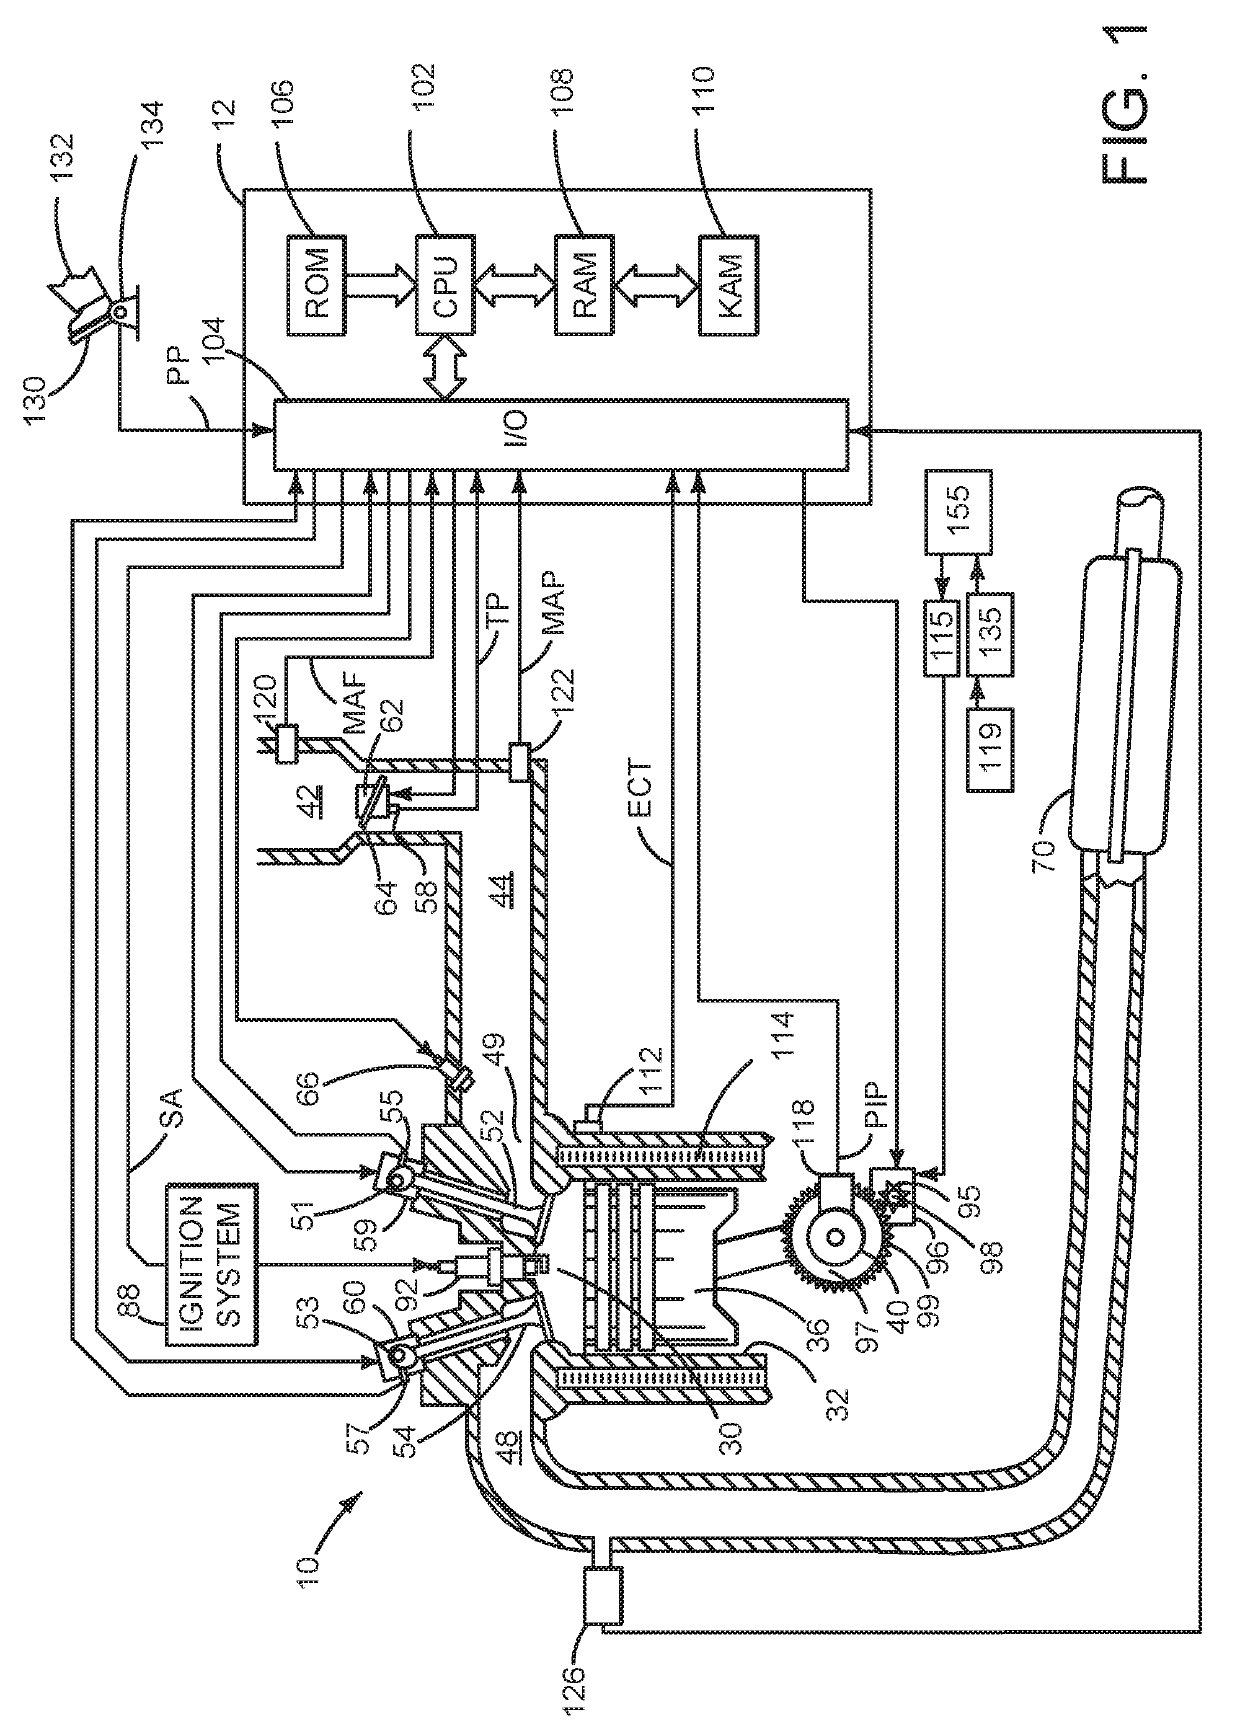 Methods and systems for improving engine starter durability for a stop/start vehicle